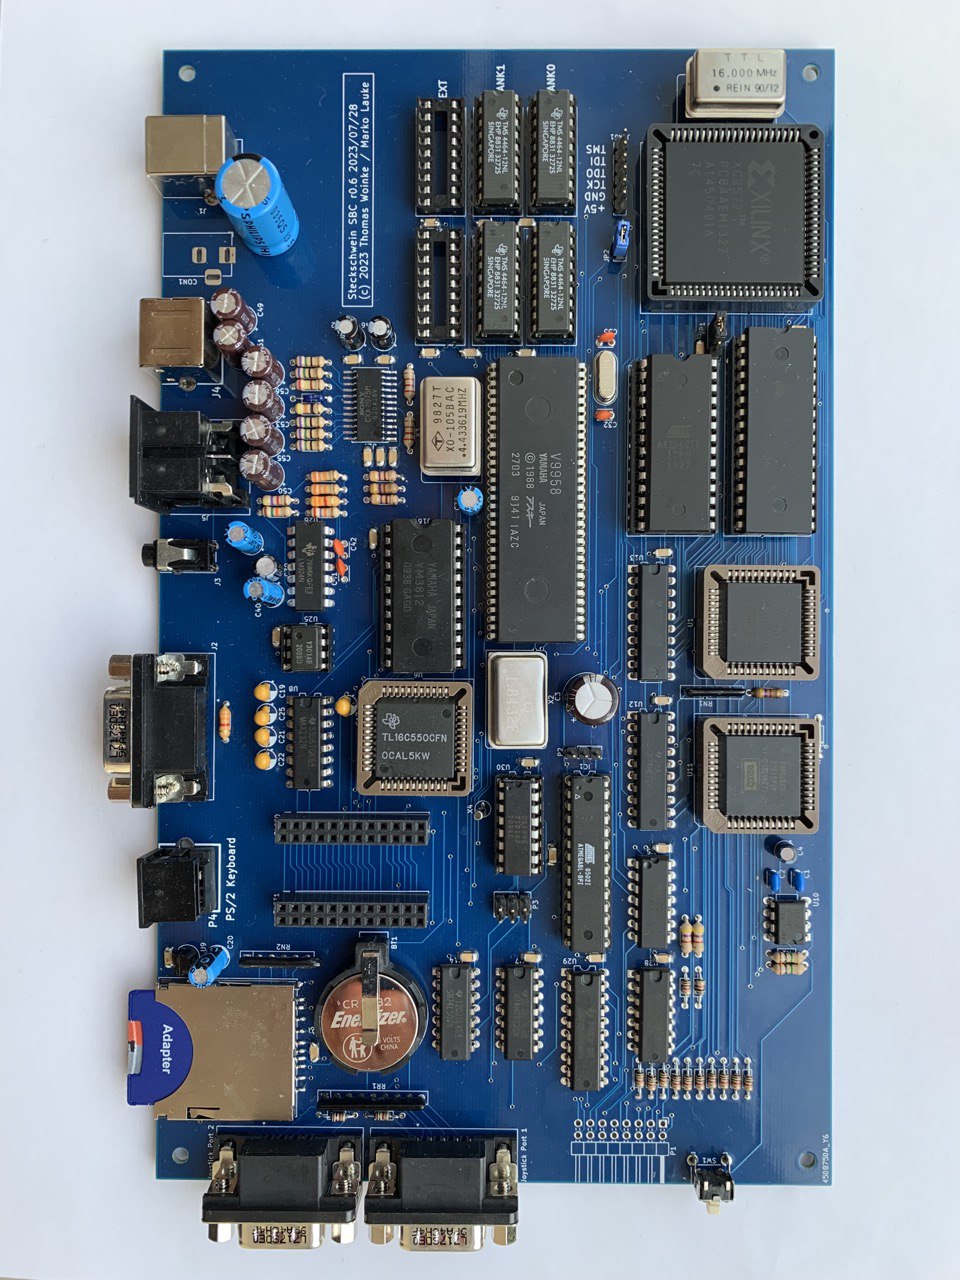 (almost) Fully assembled (and working) rev 0.6 board